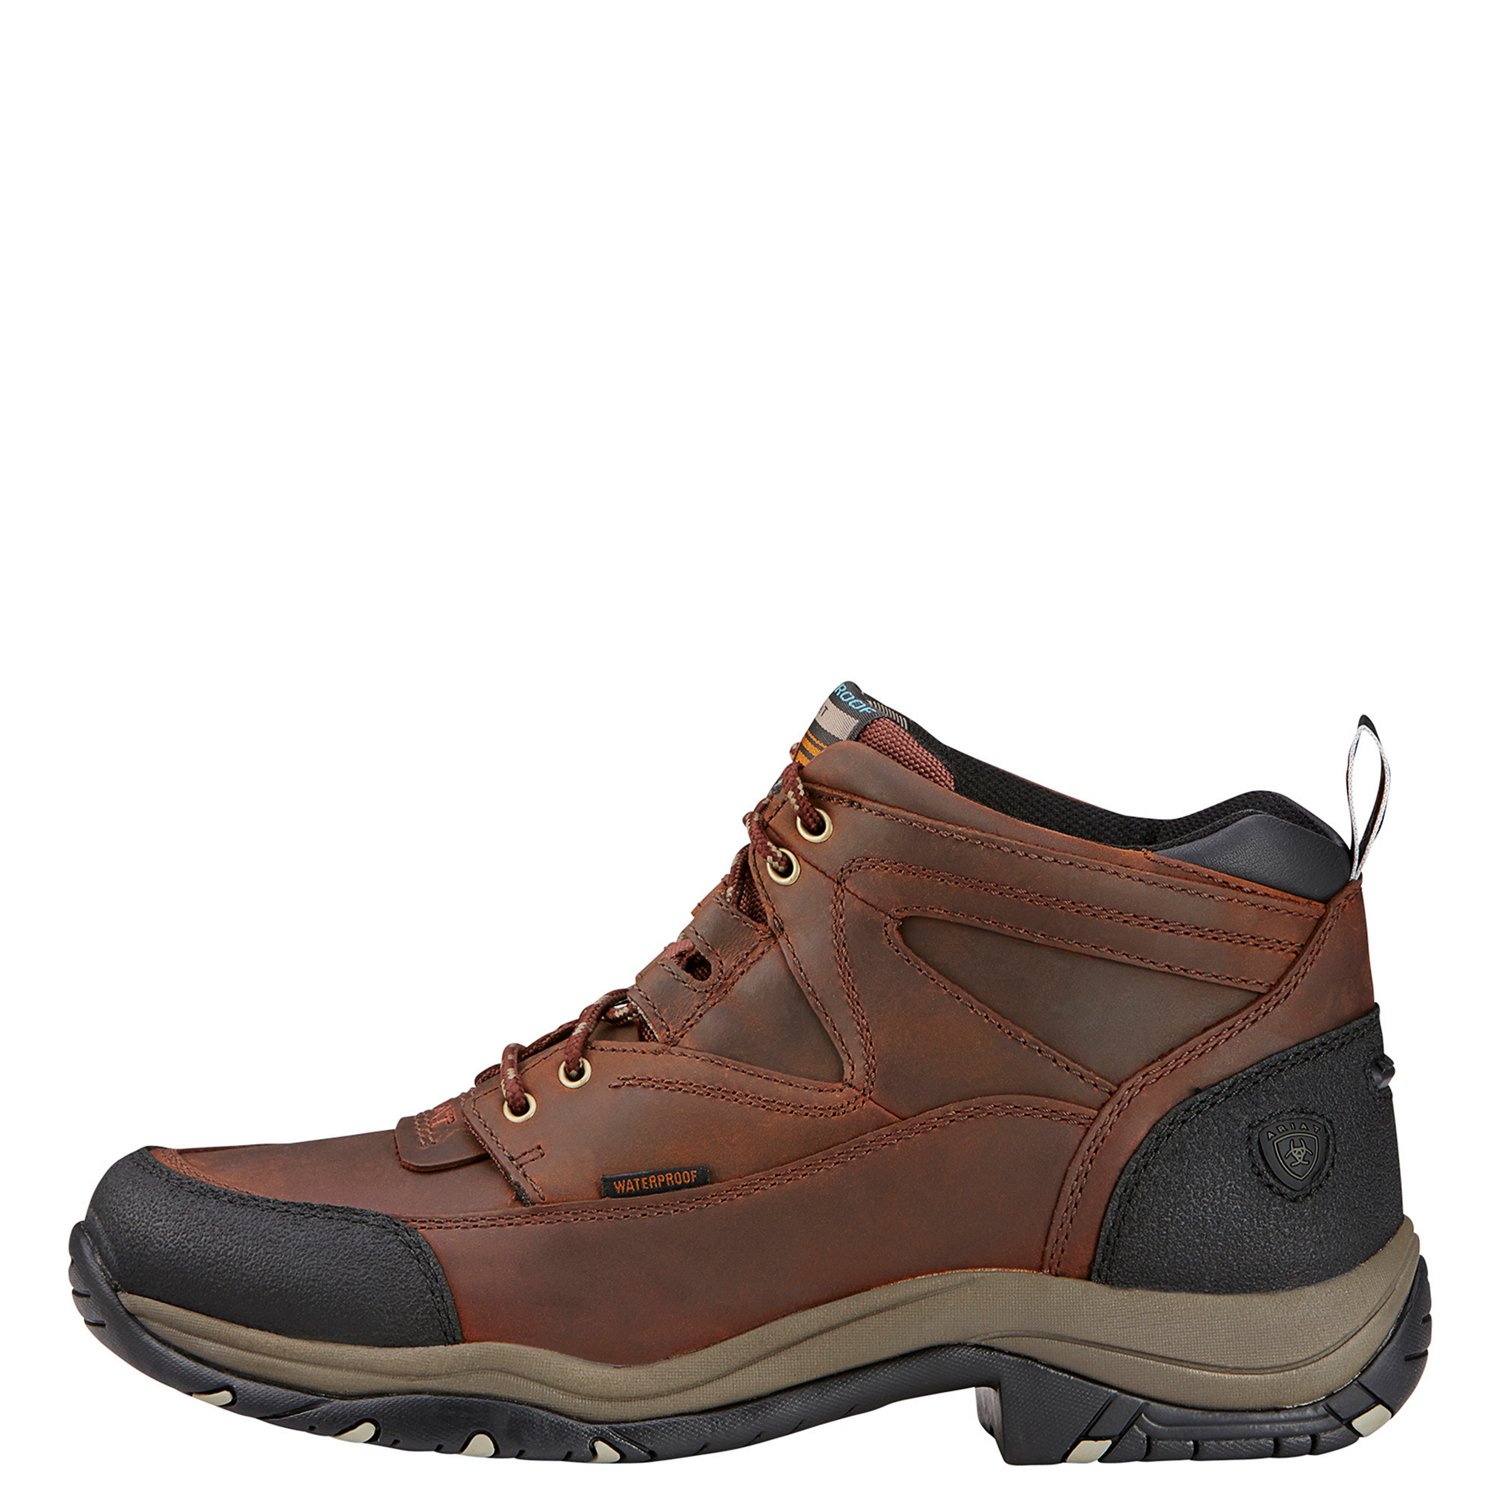 Ariat Men's Terrain H2O Lace Up Work Boots Academy